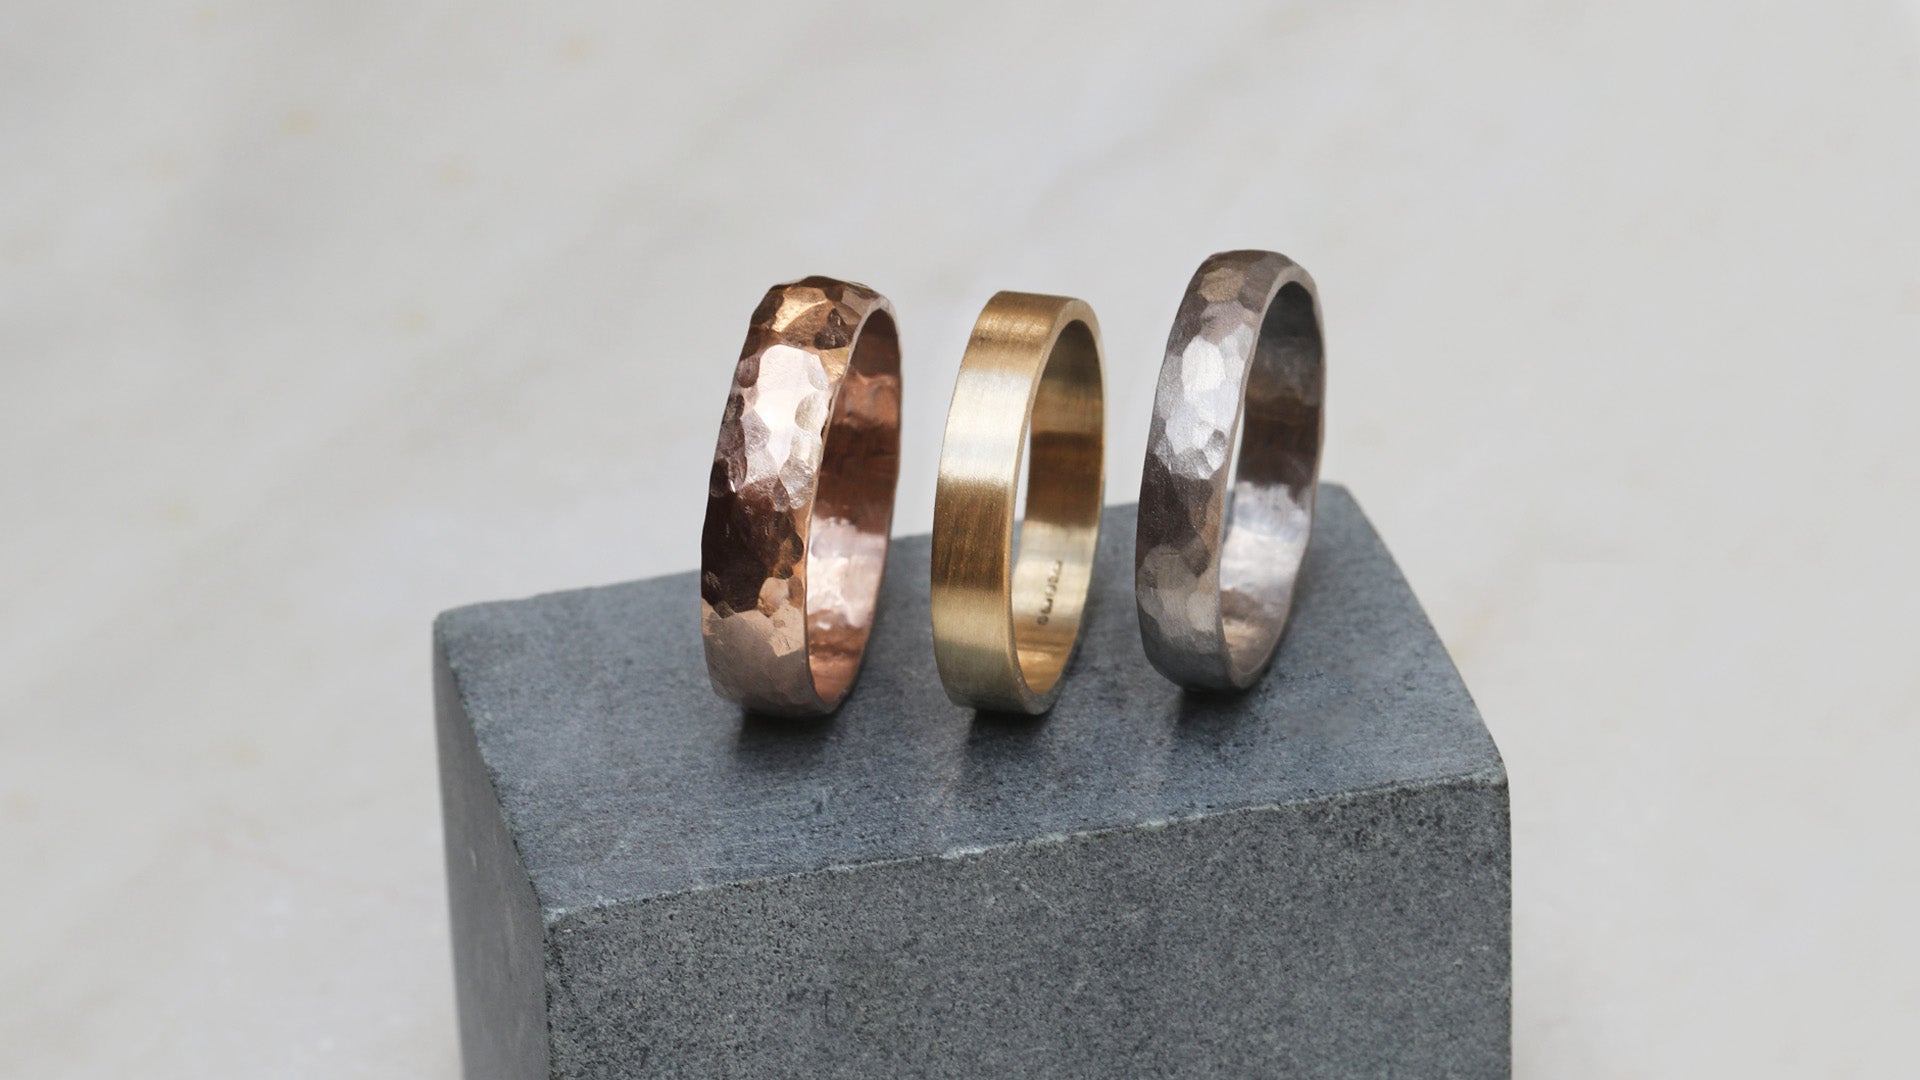 Our Mens Wedding Bands pictured in 18ct Red, Yellow and White Gold, in a variety of finished - from high polish to hammered matte finish. We create custom wedding bands to suit your personal style.